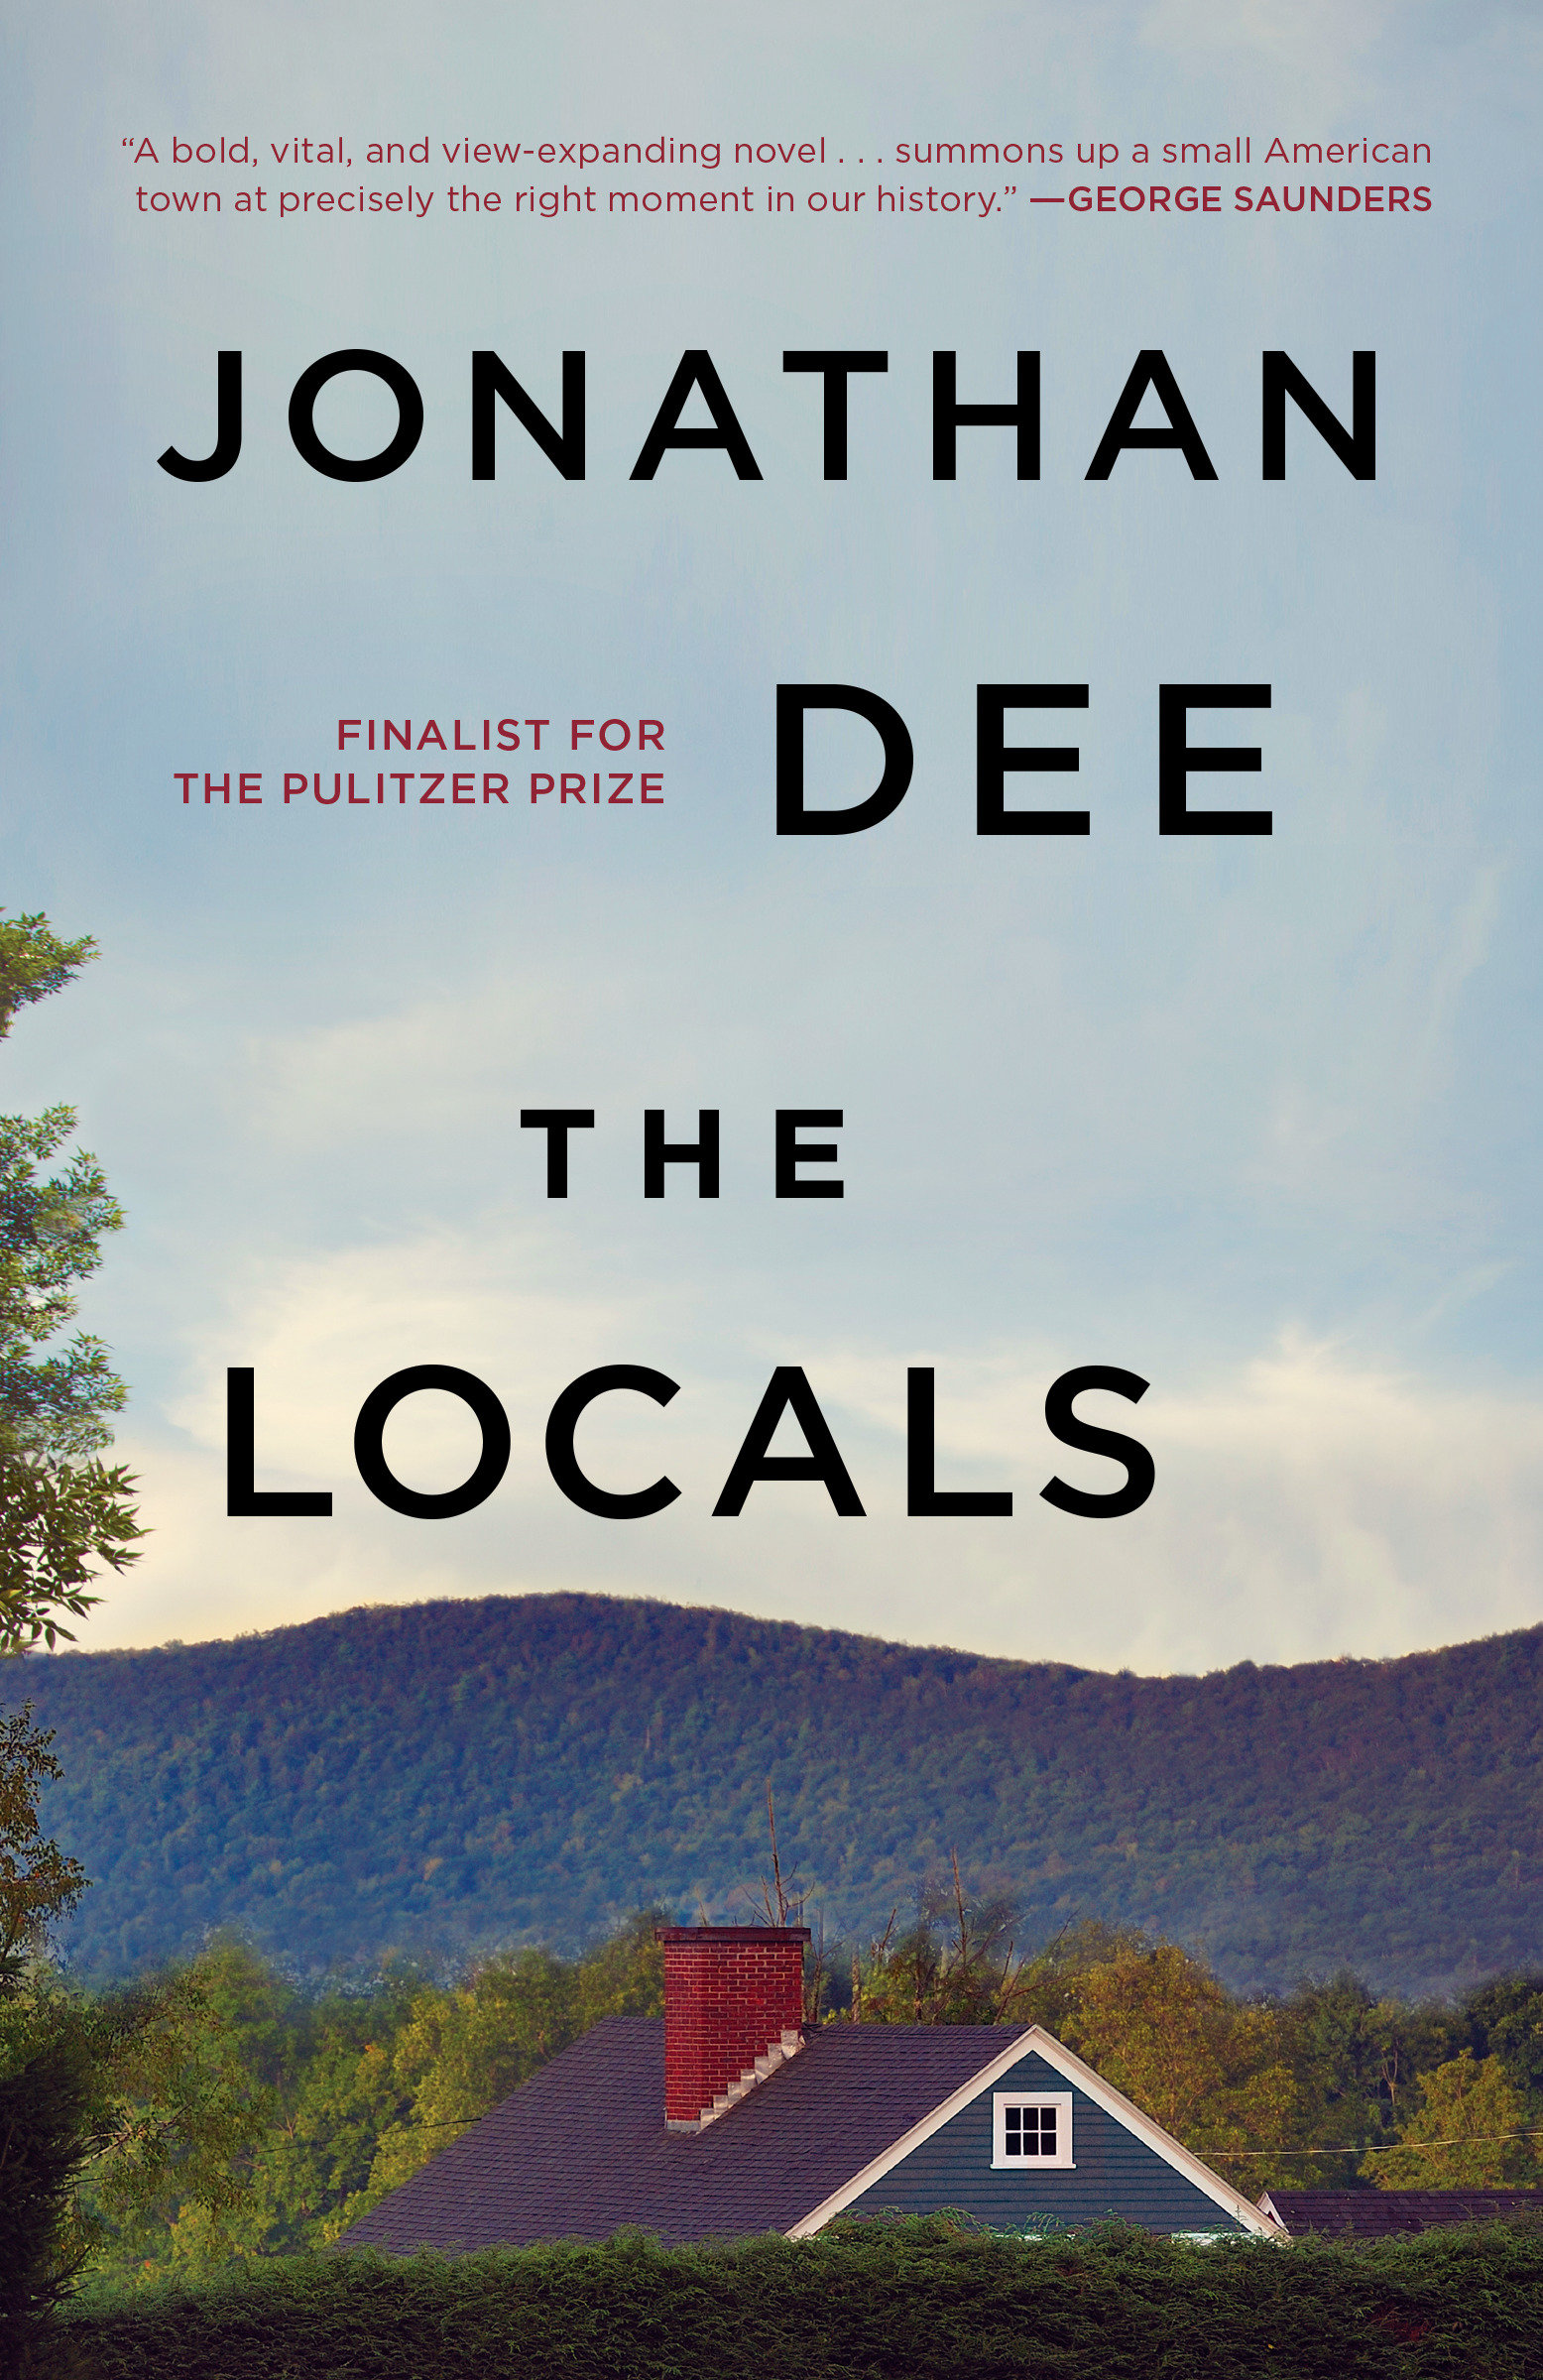 The locals cover image